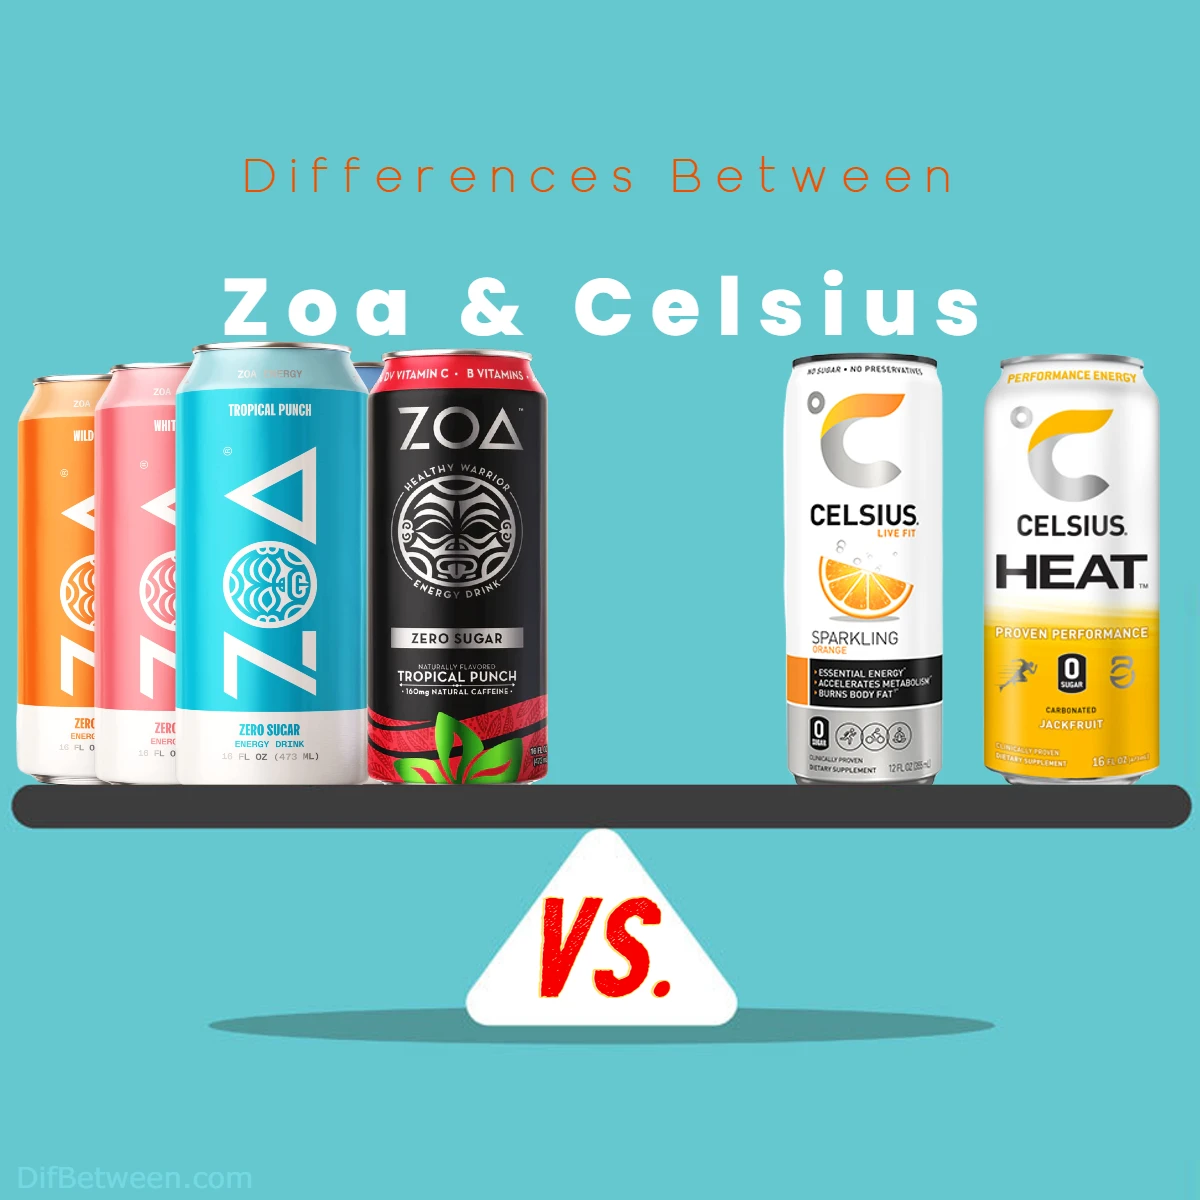 Differences Between Celsius and Zoa